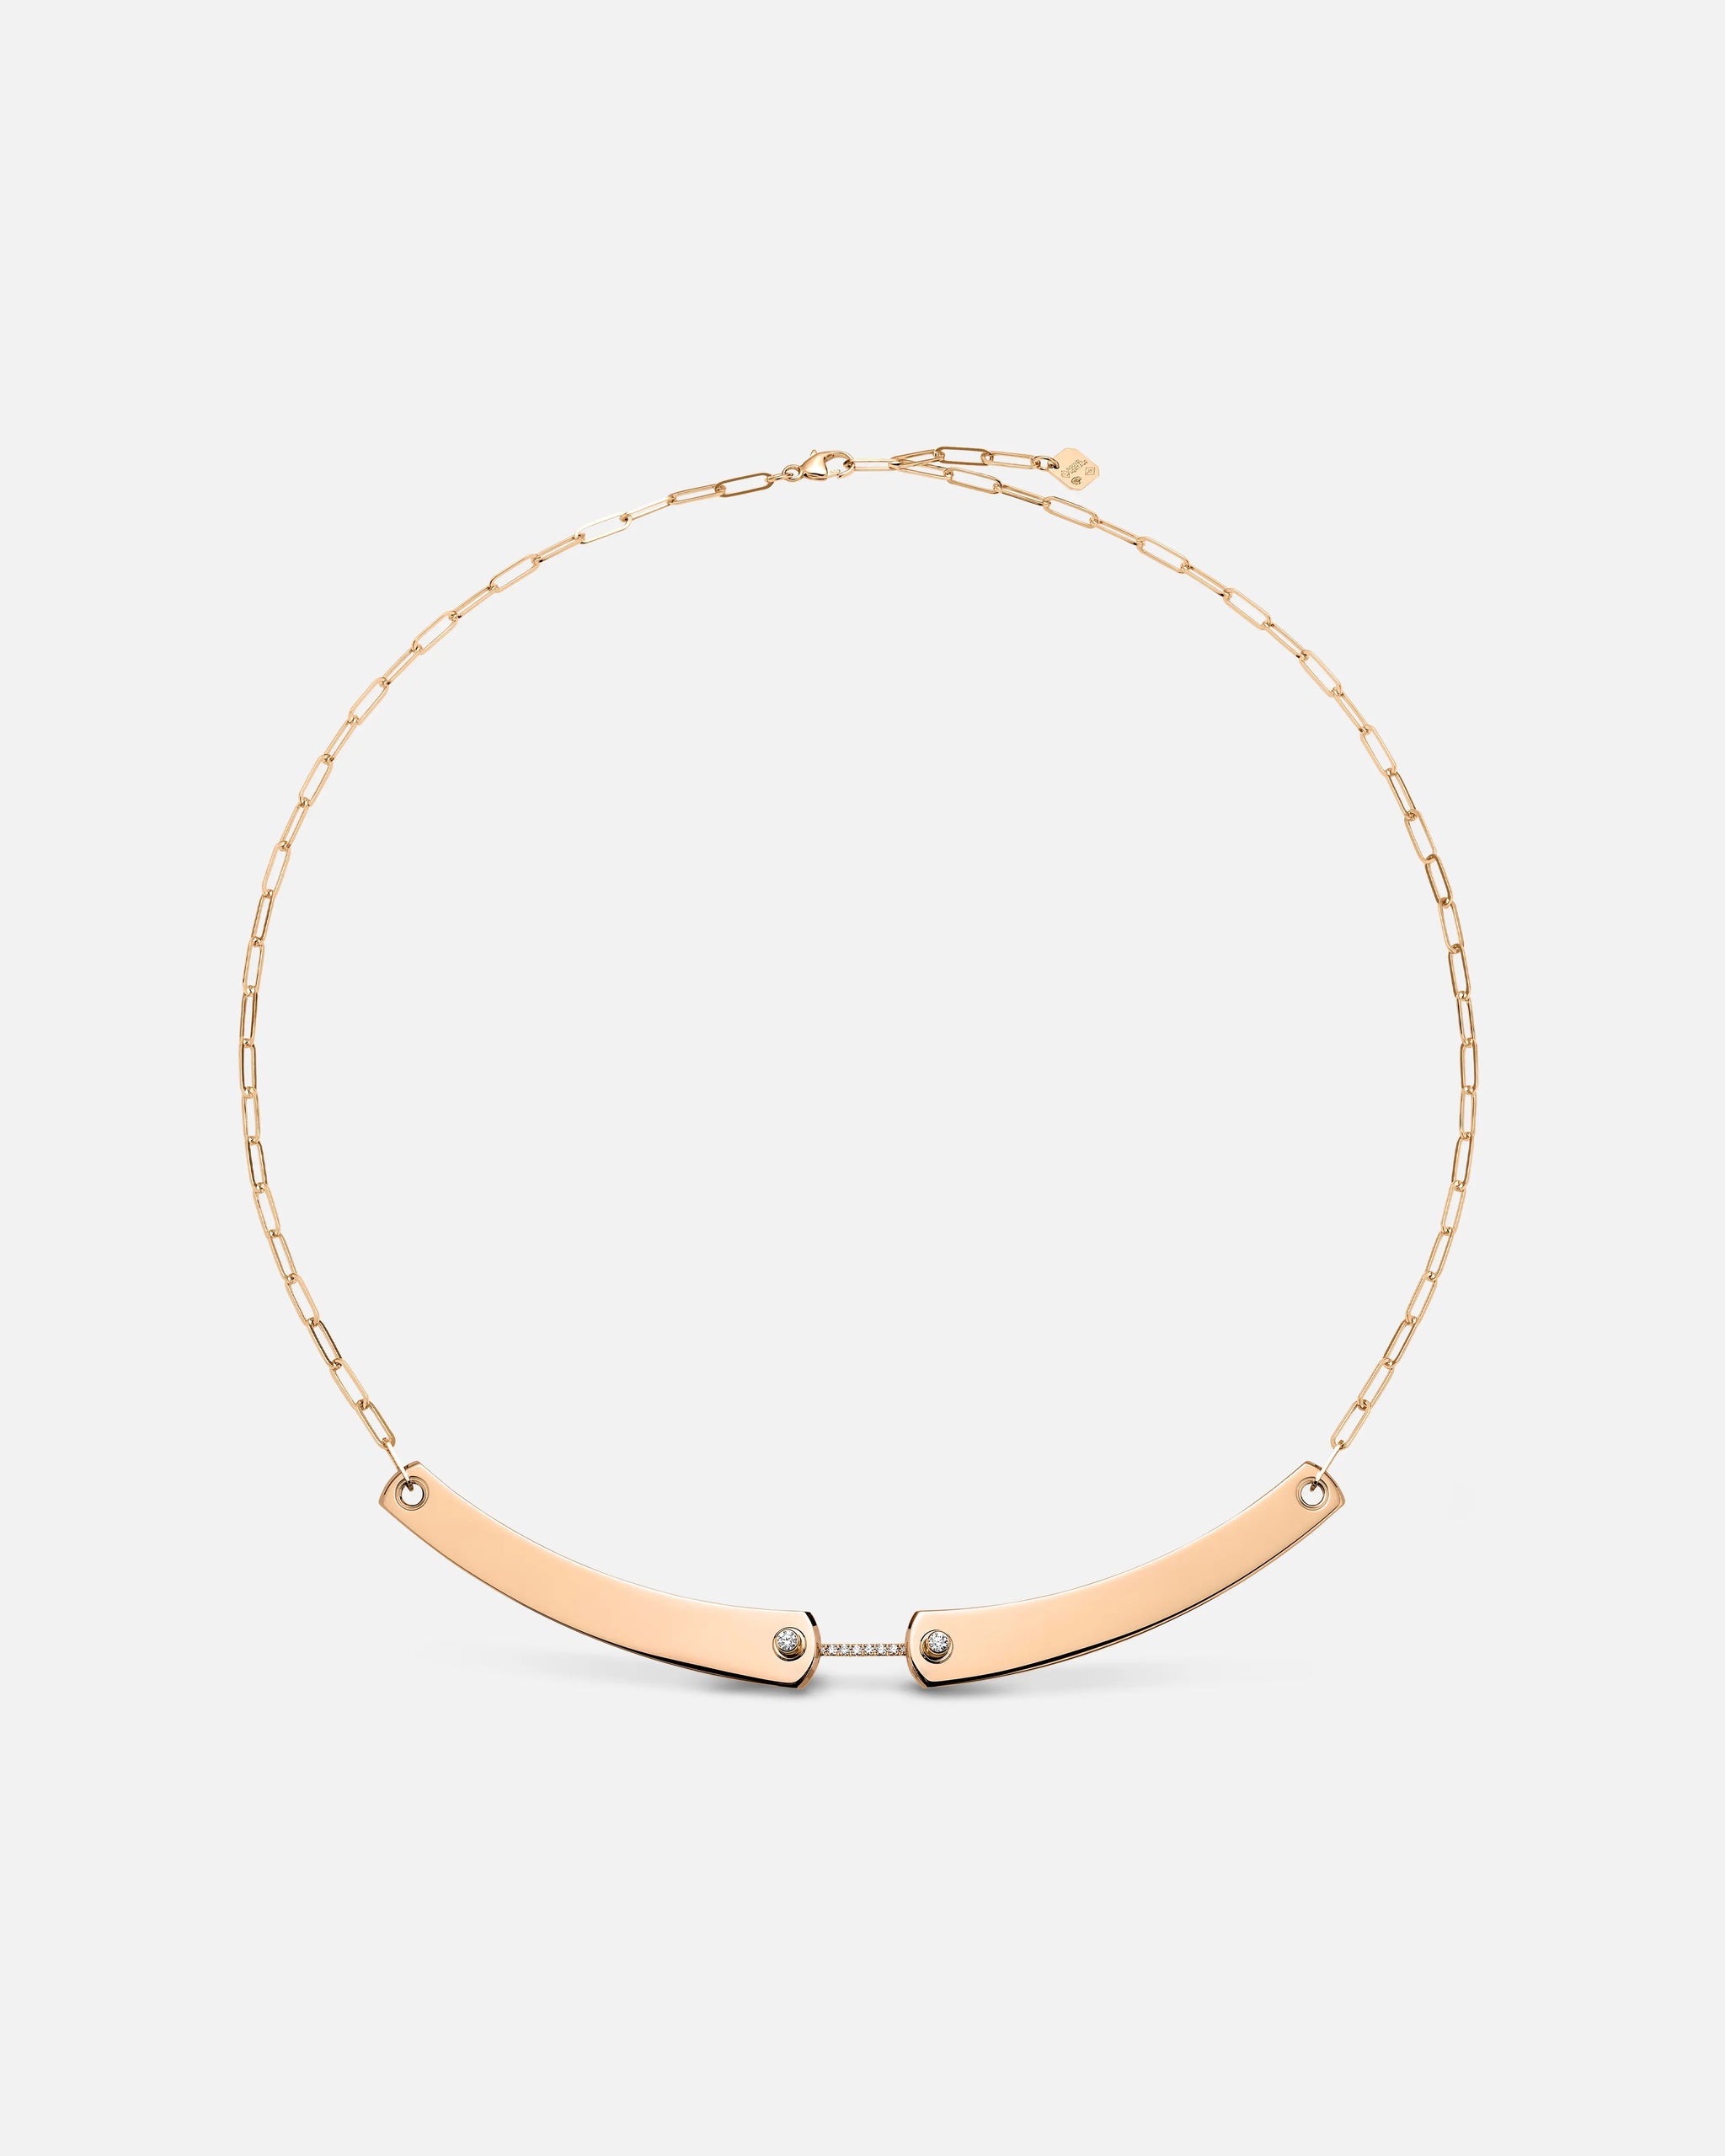 Business Meeting Mood Necklace in Rose Gold - 1 - Nouvel Heritage